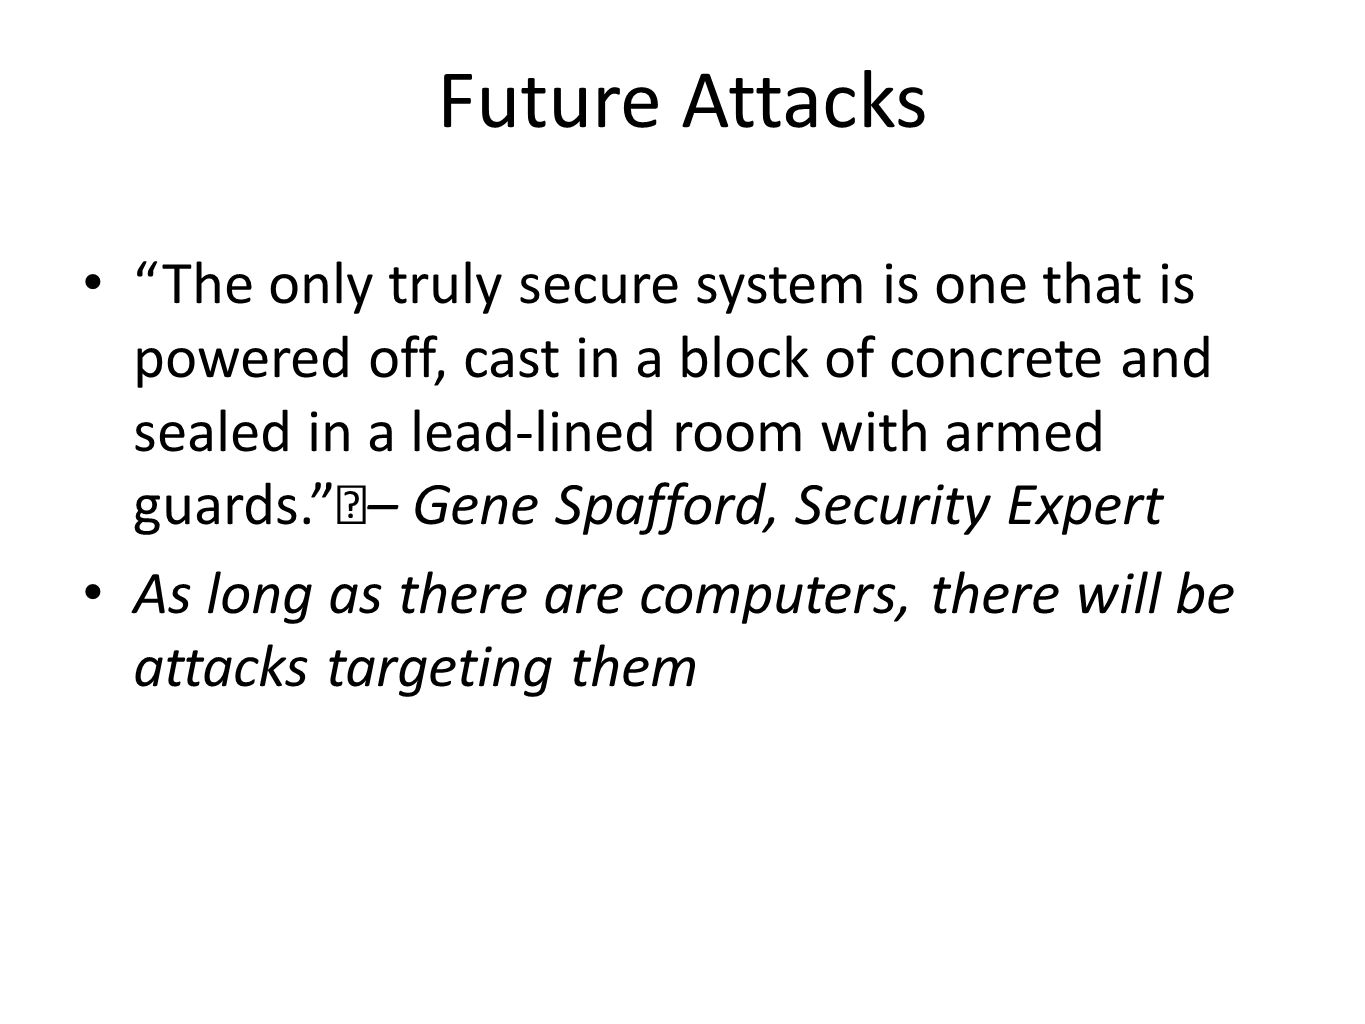 Future Attacks The only truly secure system is one that is powered off, cast in a block of concrete and sealed in a lead-lined room with armed guards. – Gene Spafford, Security Expert As long as there are computers, there will be attacks targeting them